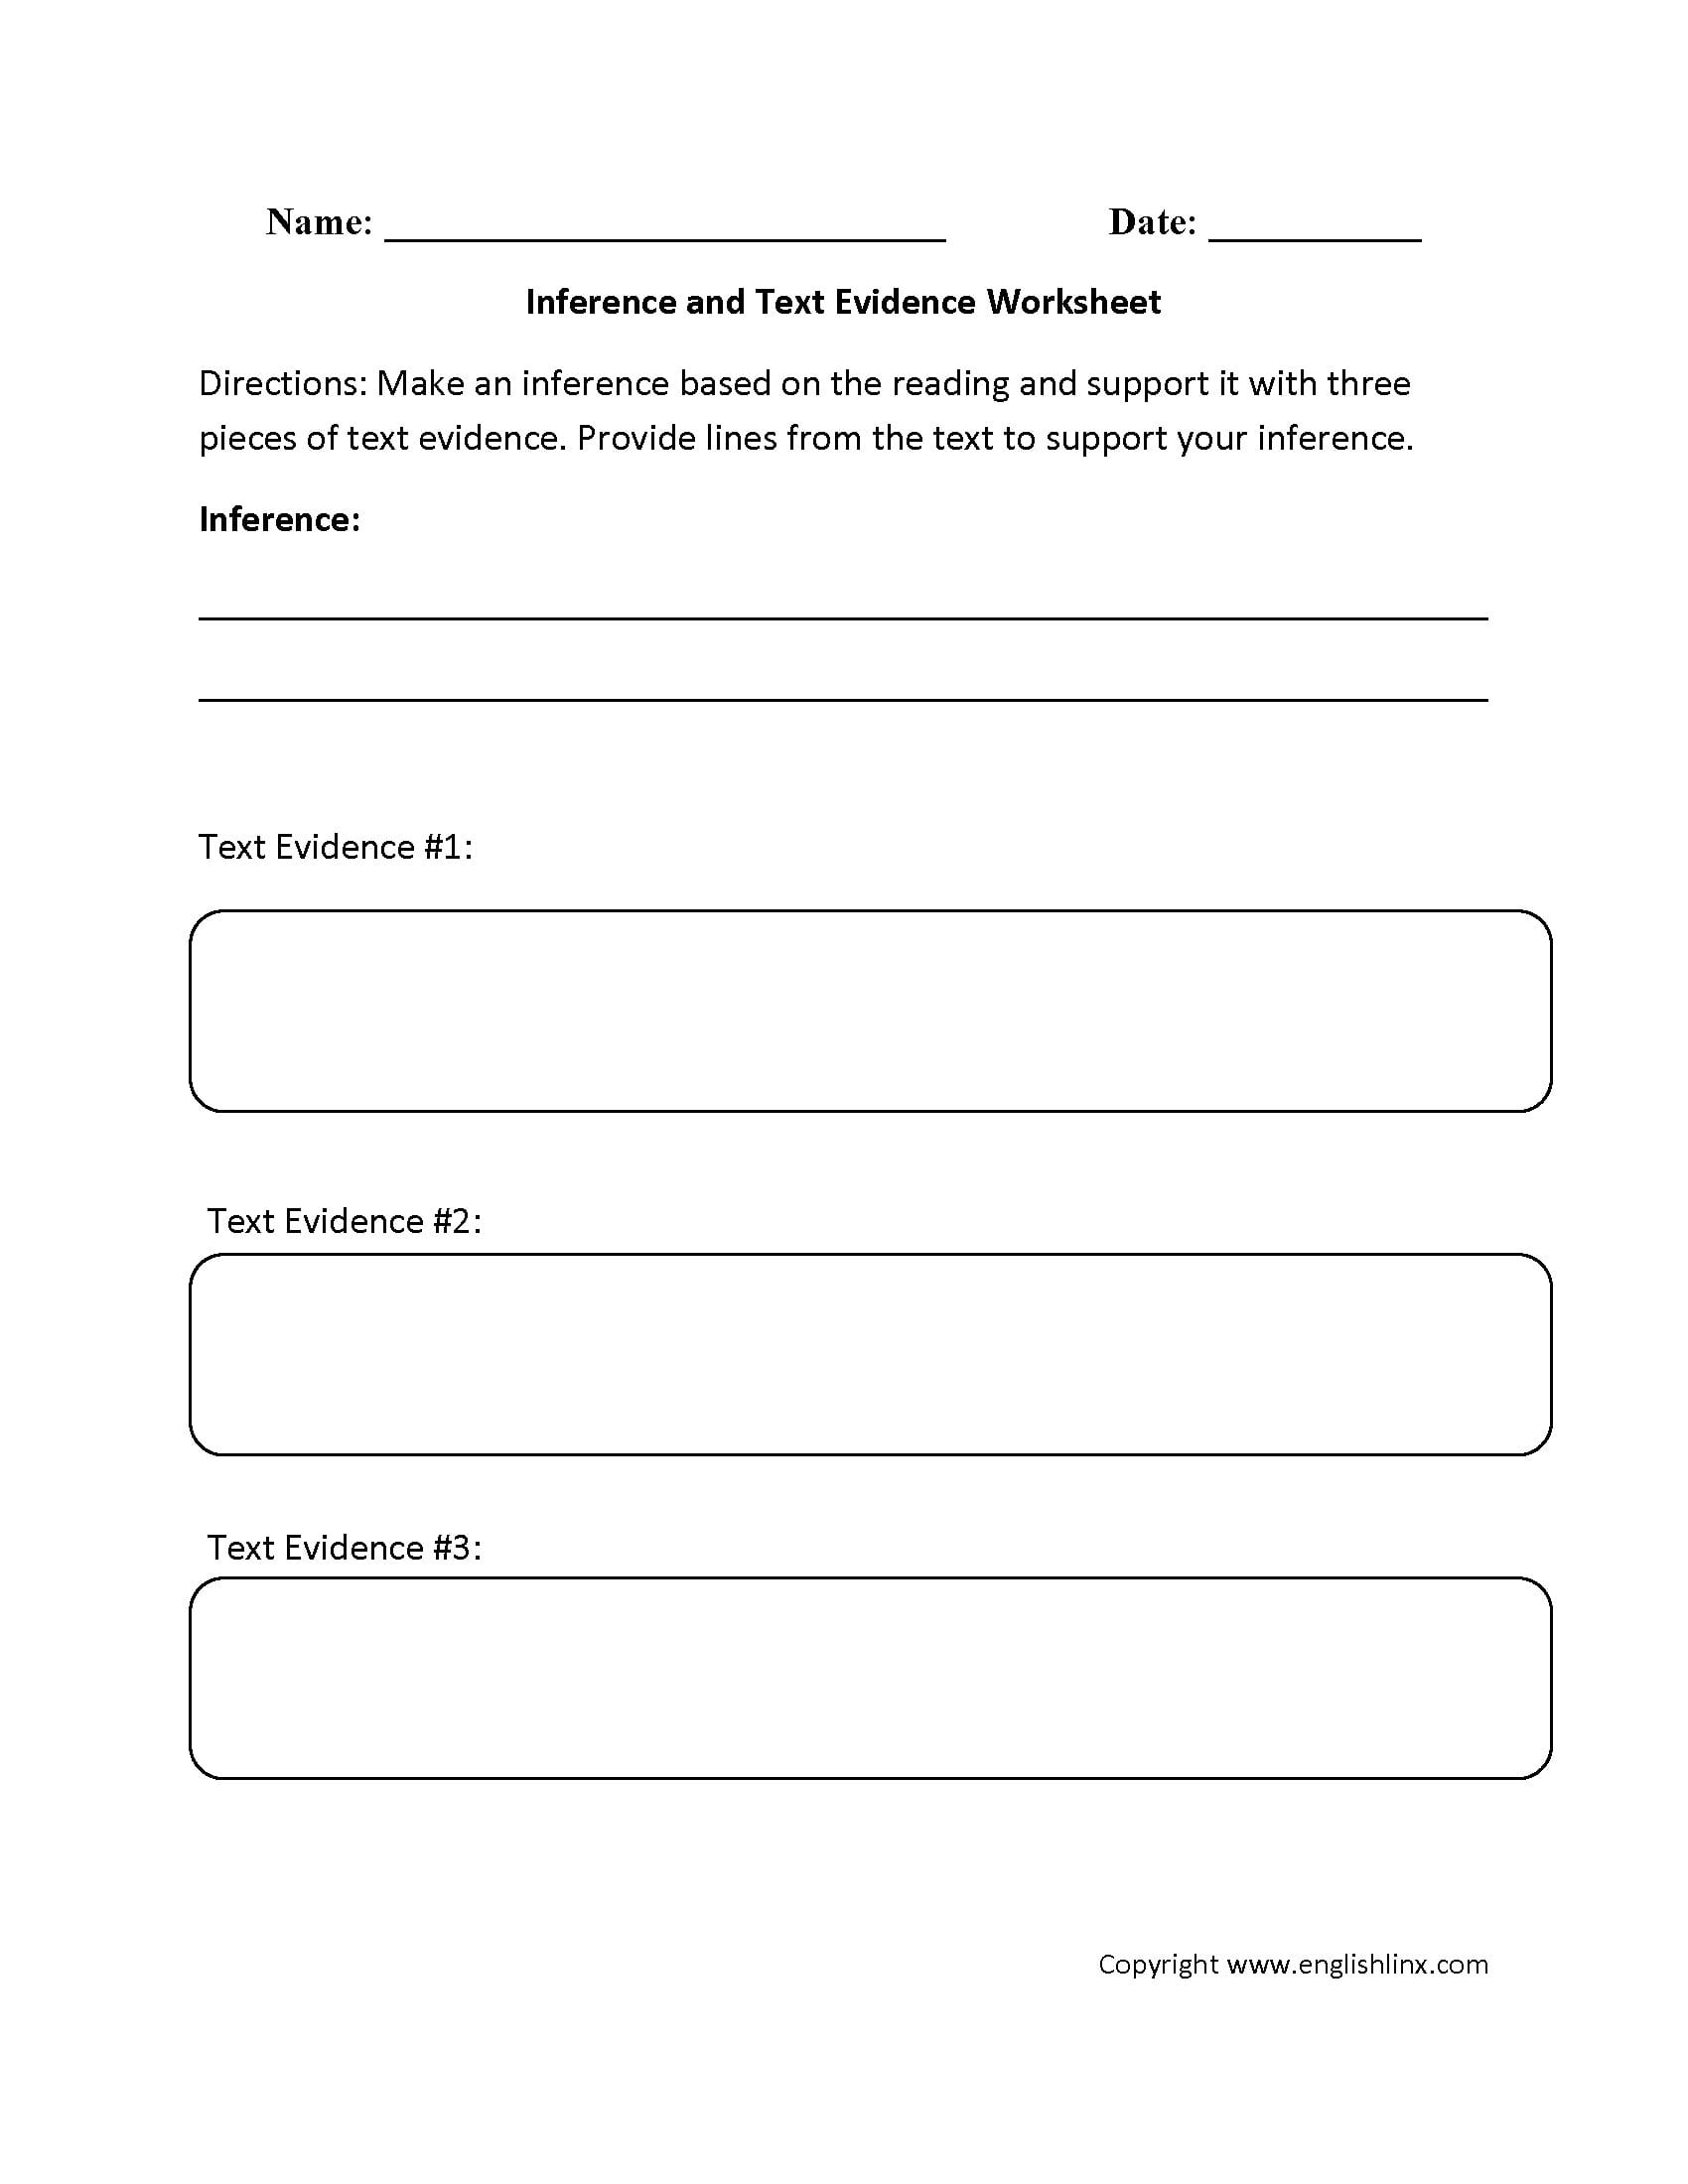 Citing Textual Evidence Multiple Choice Worksheet